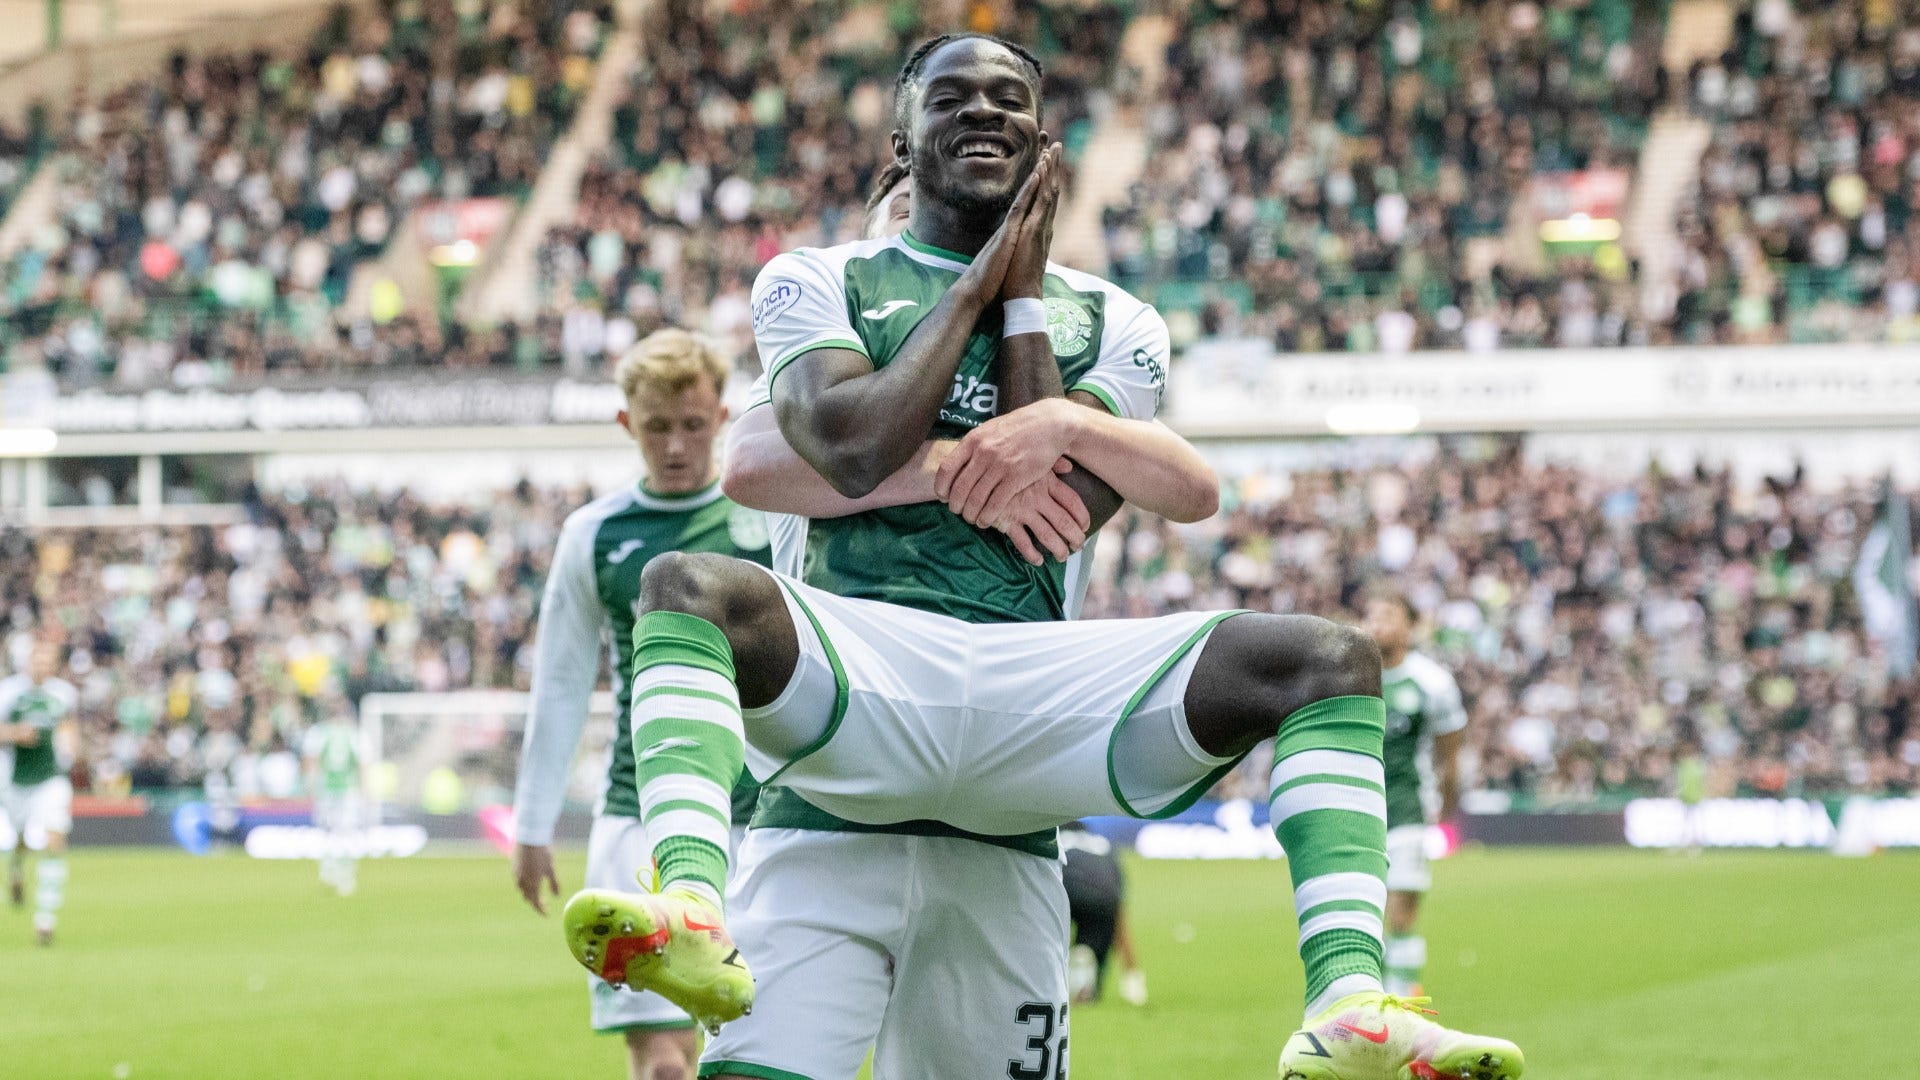 Hearts vs Hibernian Live stream, TV channel, kick-off time and where to watch Goal US